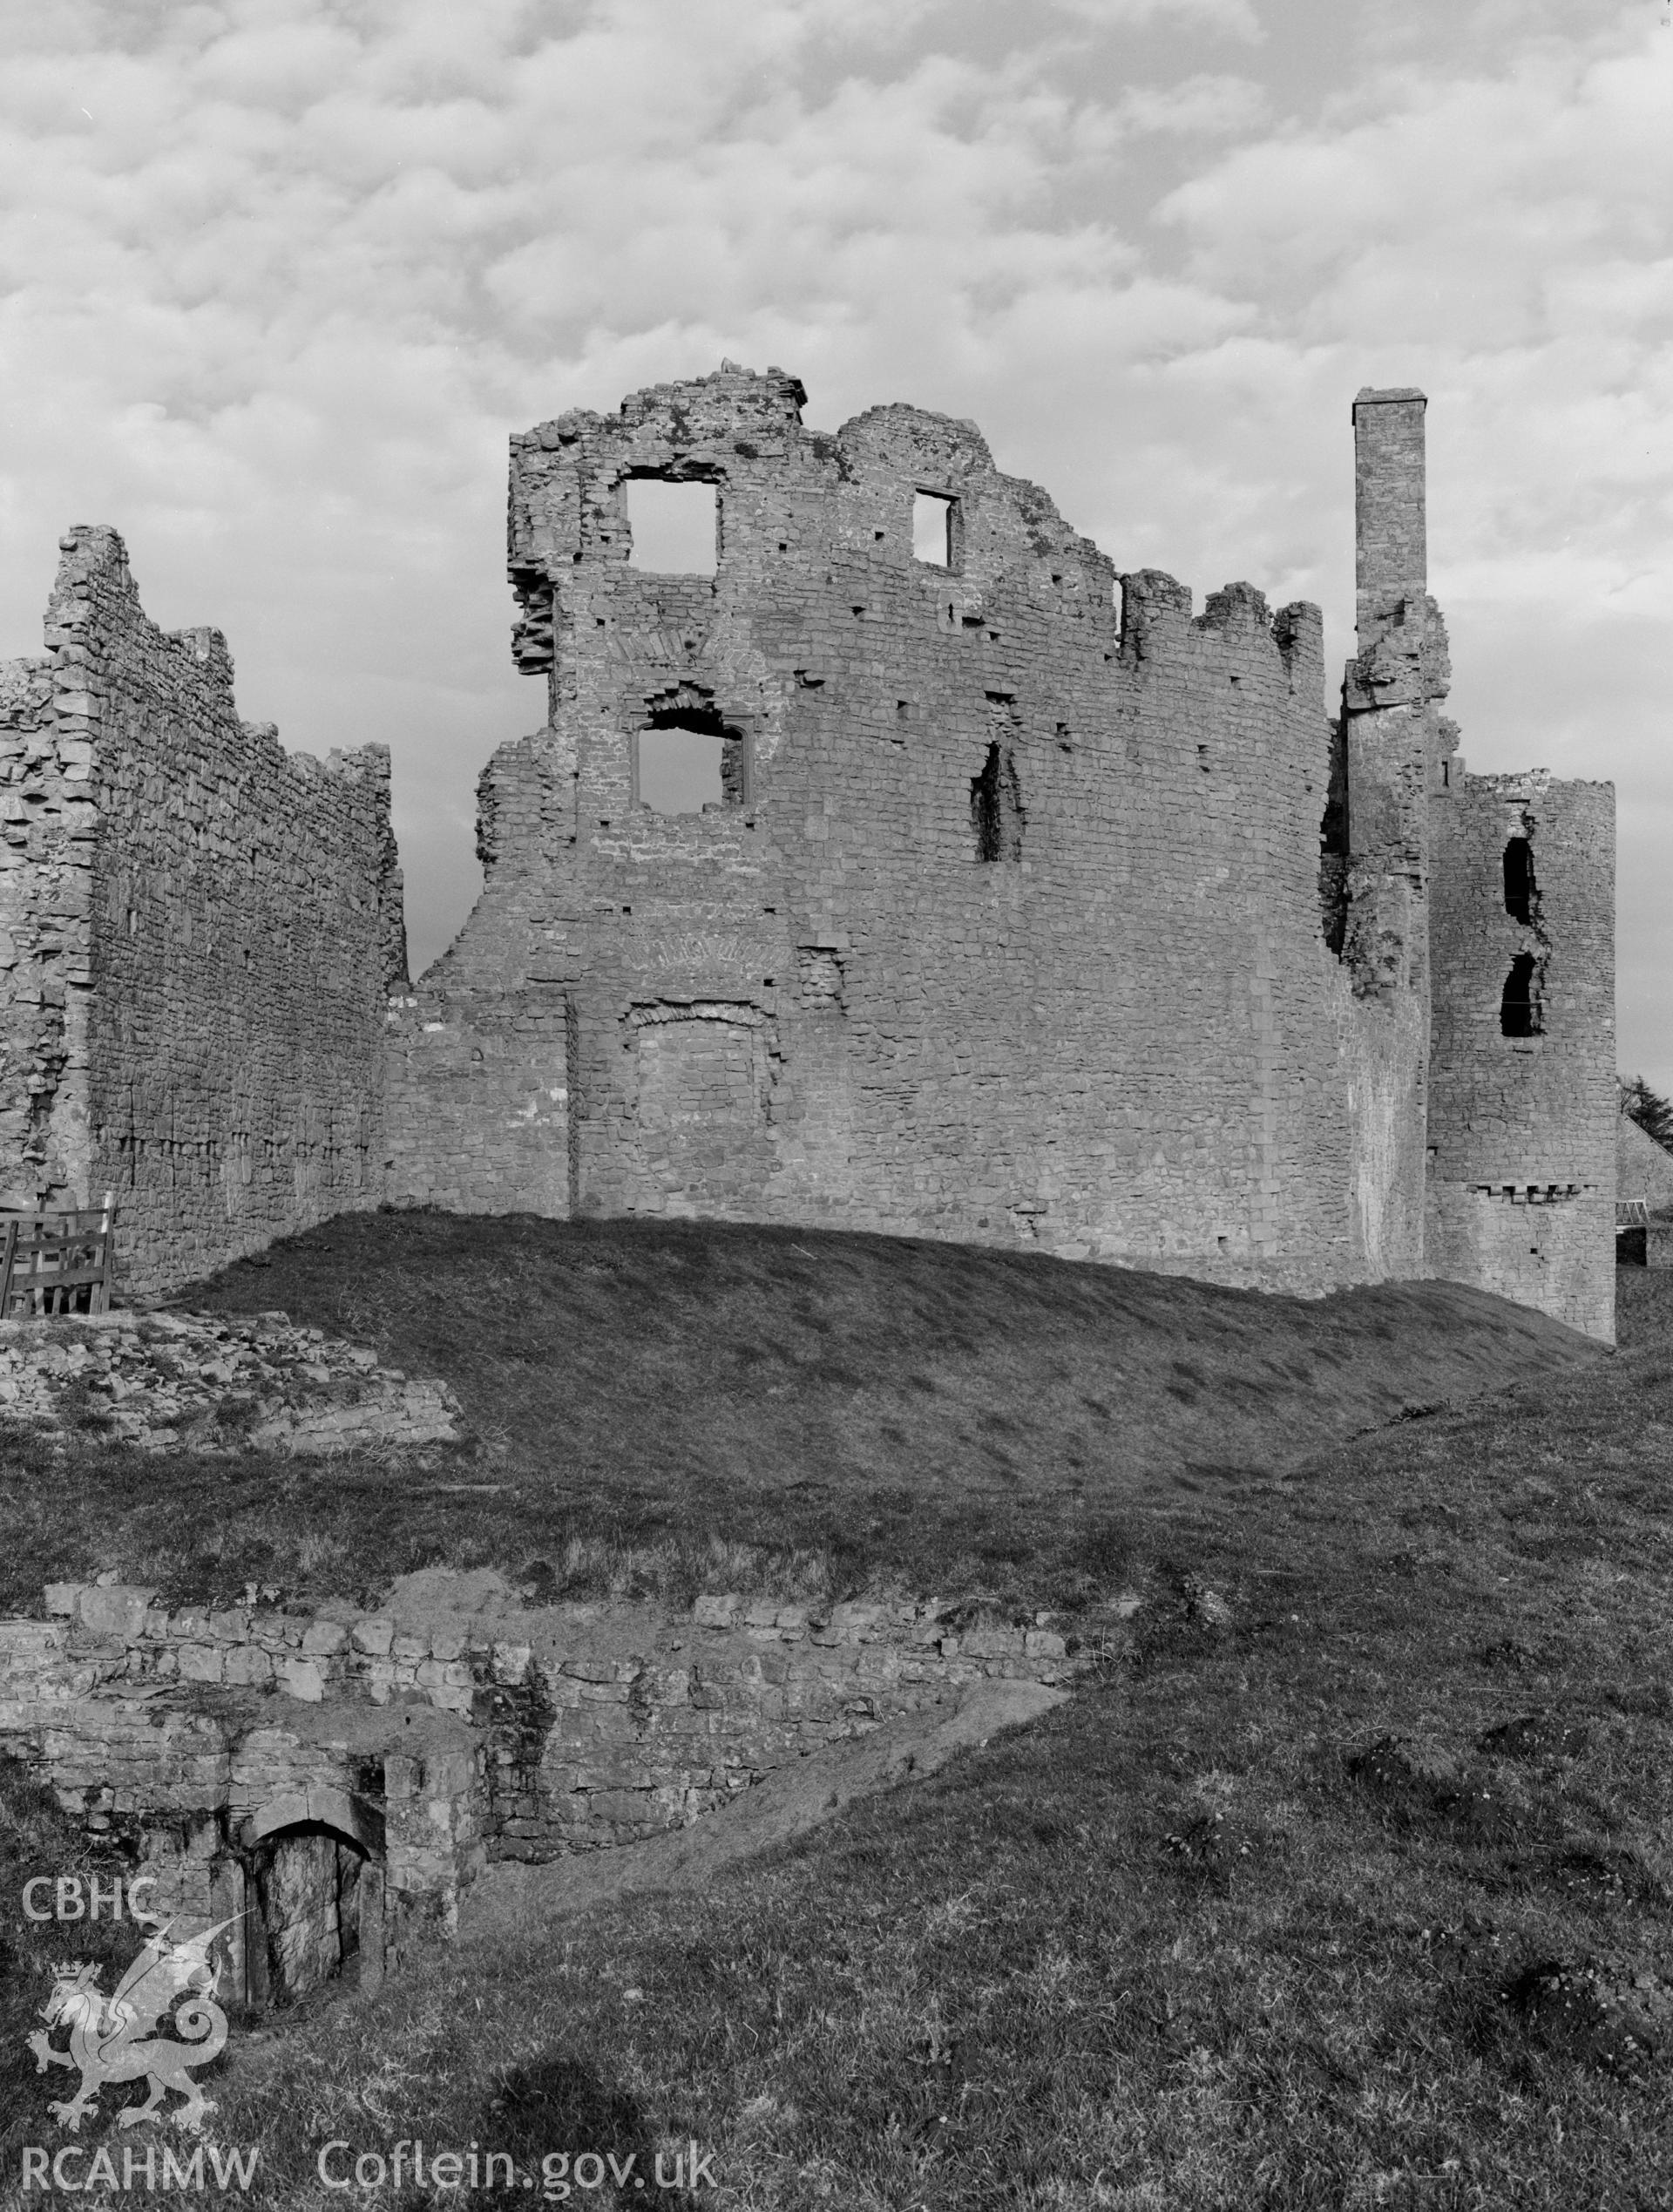 Remains of the Tudor apartments at Coity Castle, Coity Higher, taken 07.04.1941.